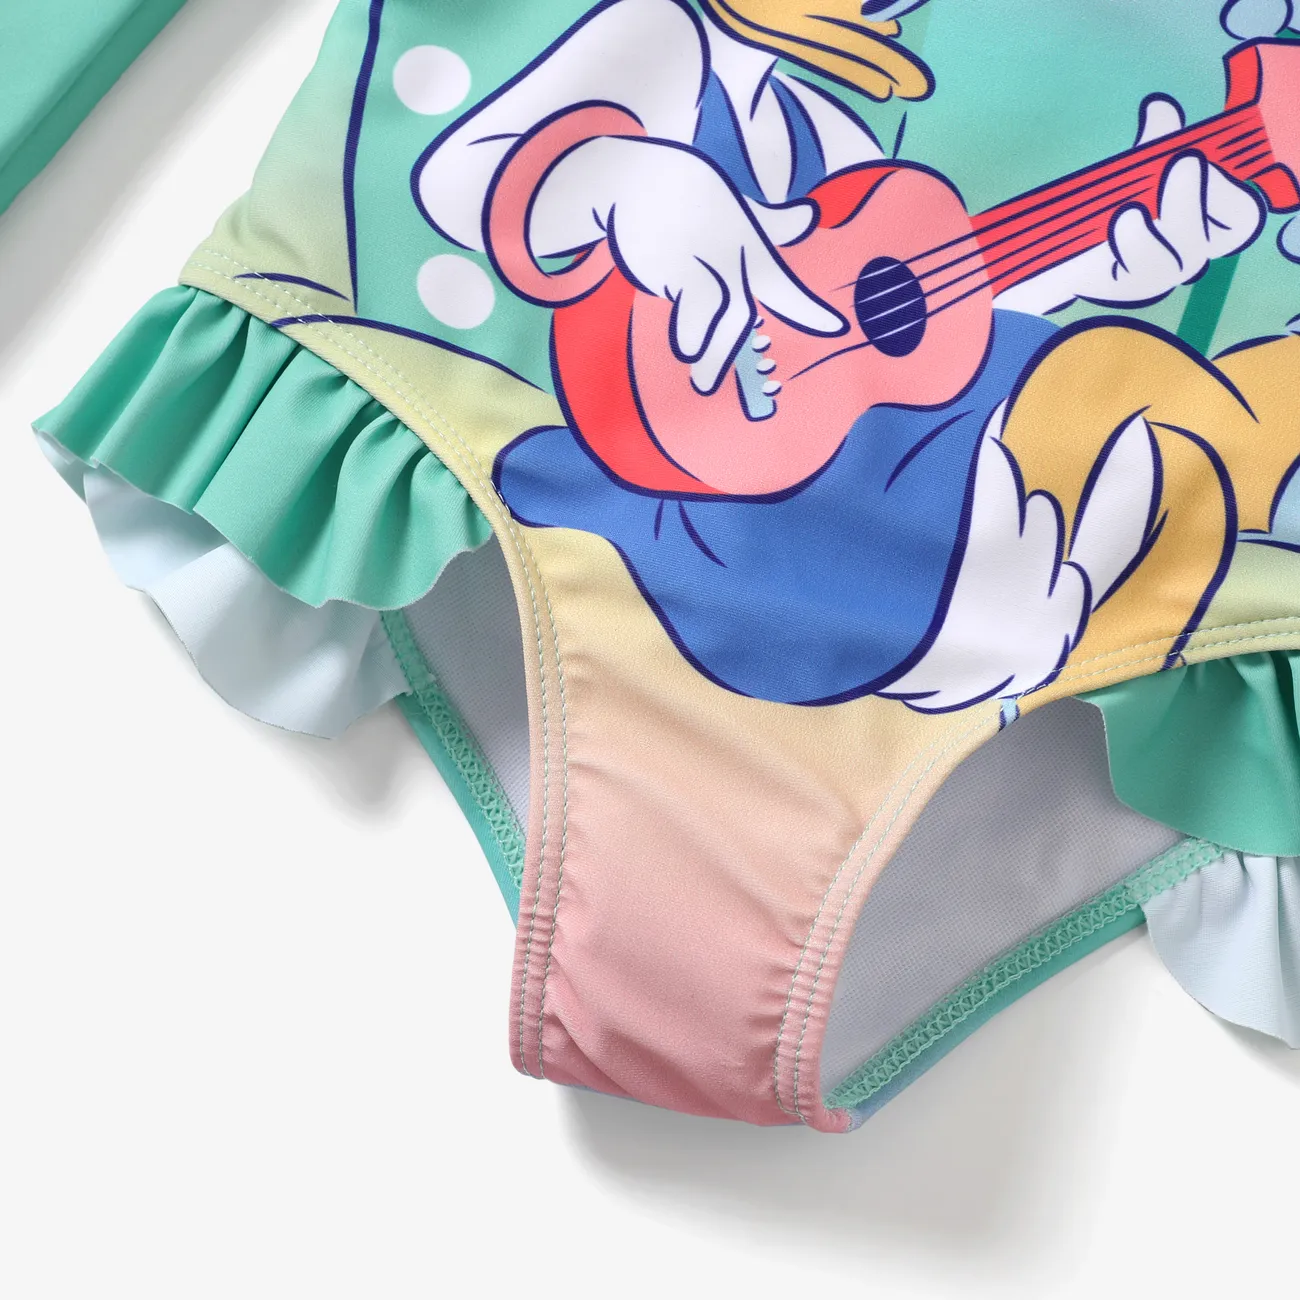 Disney Mickey and Friends Fille Bord à volants Enfantin Maillots be bain Turquoise big image 1